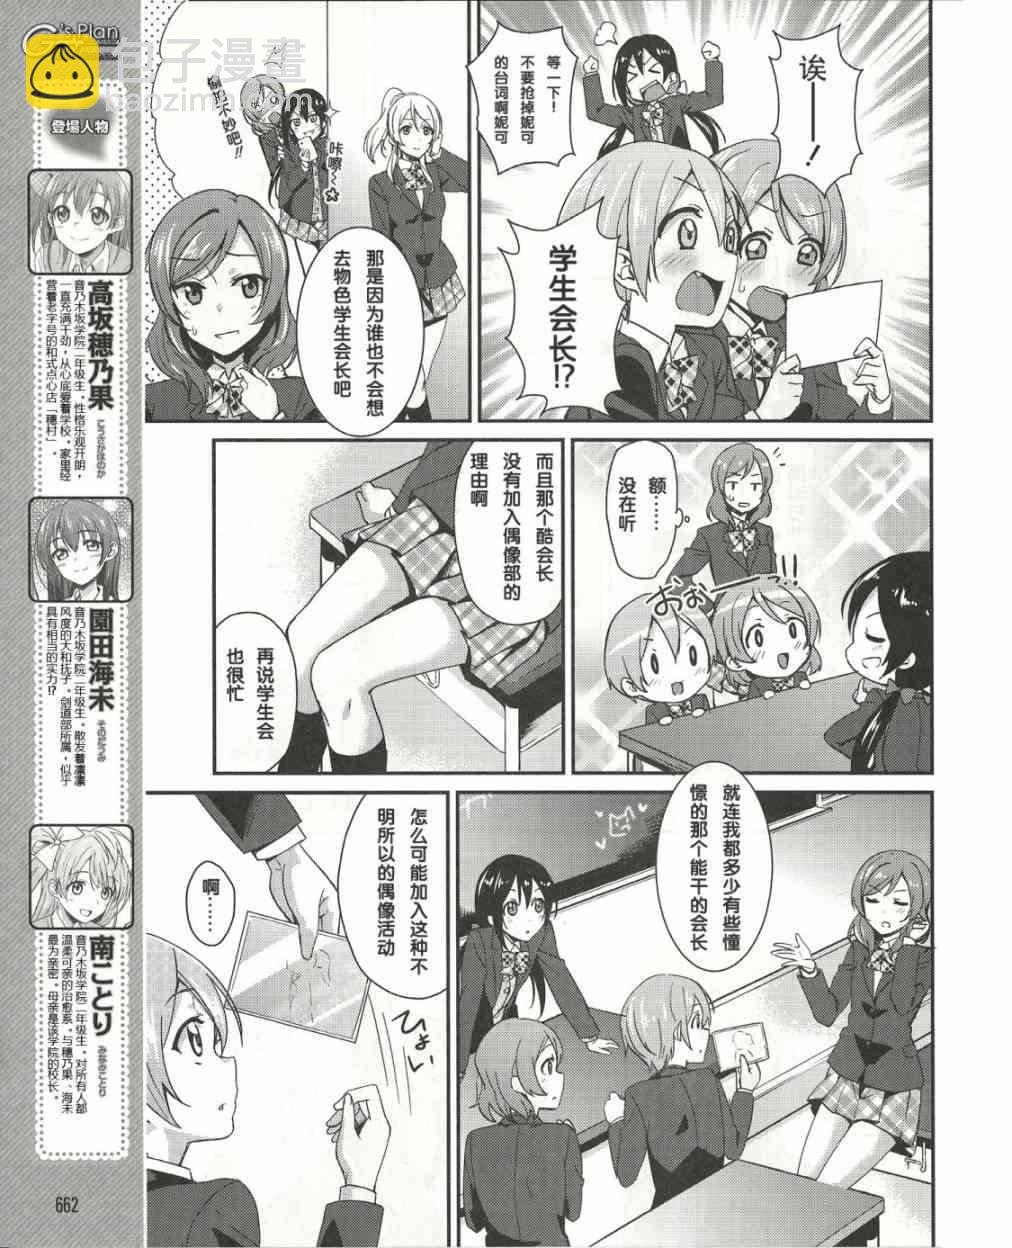 LoveLive - 15話 - 1